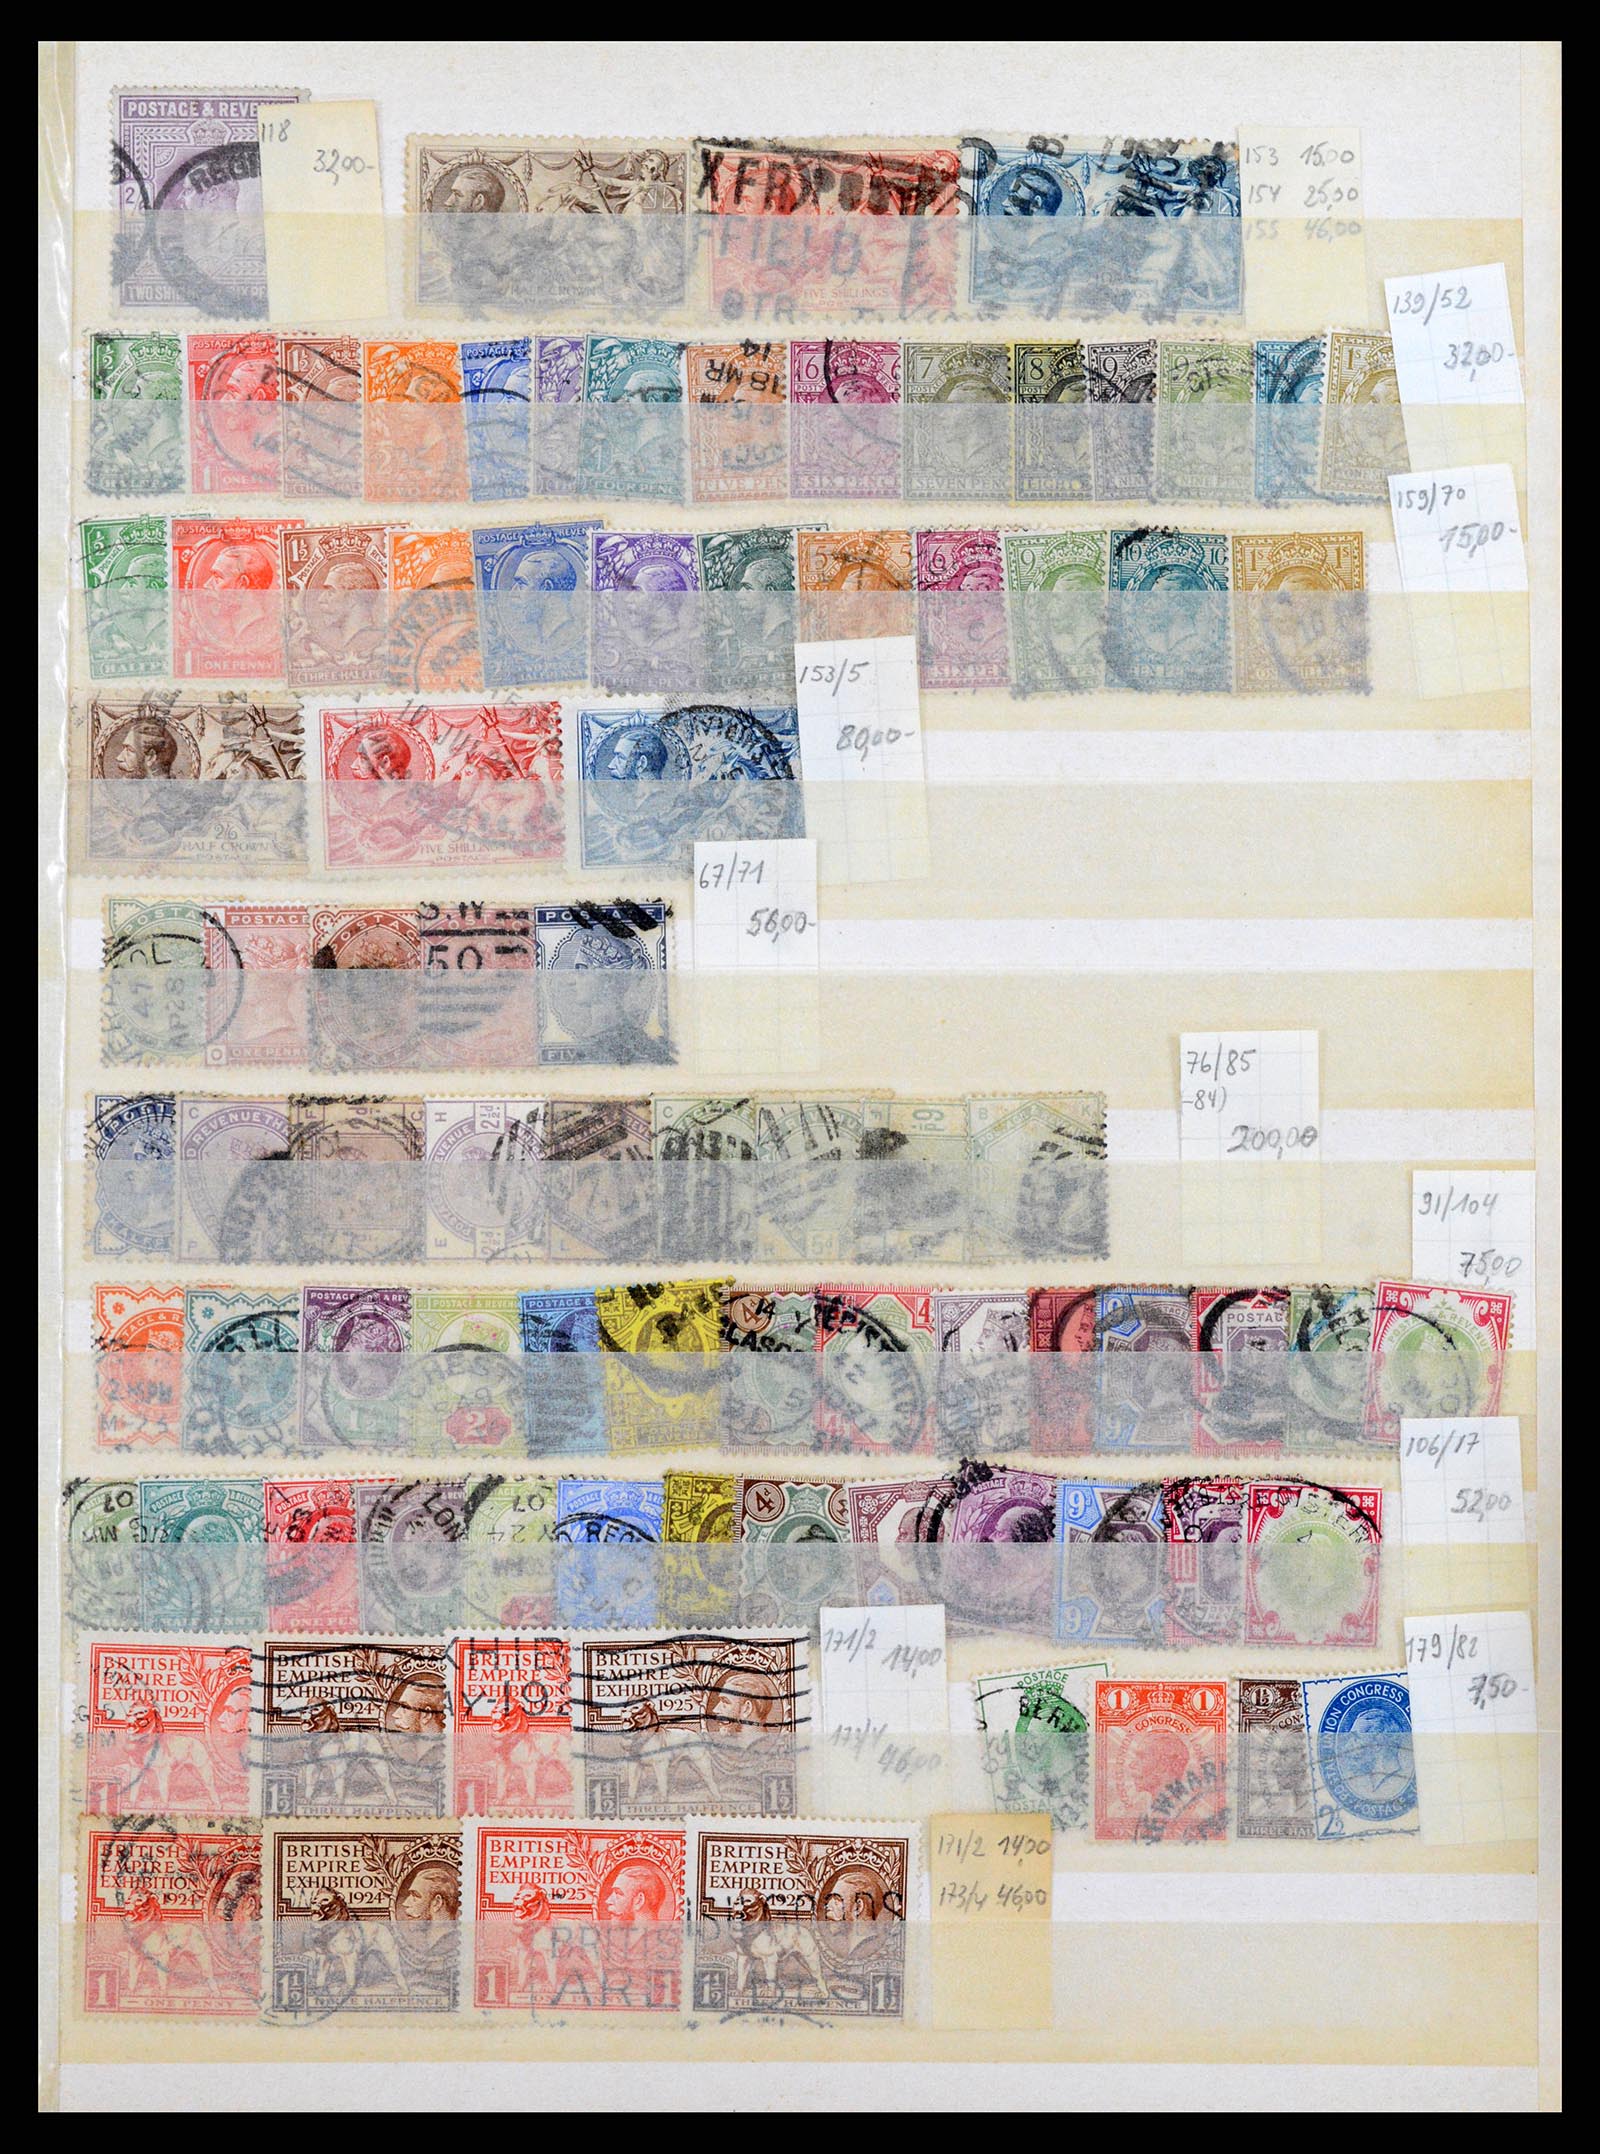 37364 023 - Stamp collection 37364 Channel Islands 1940-1980 and Great Britain 1880-